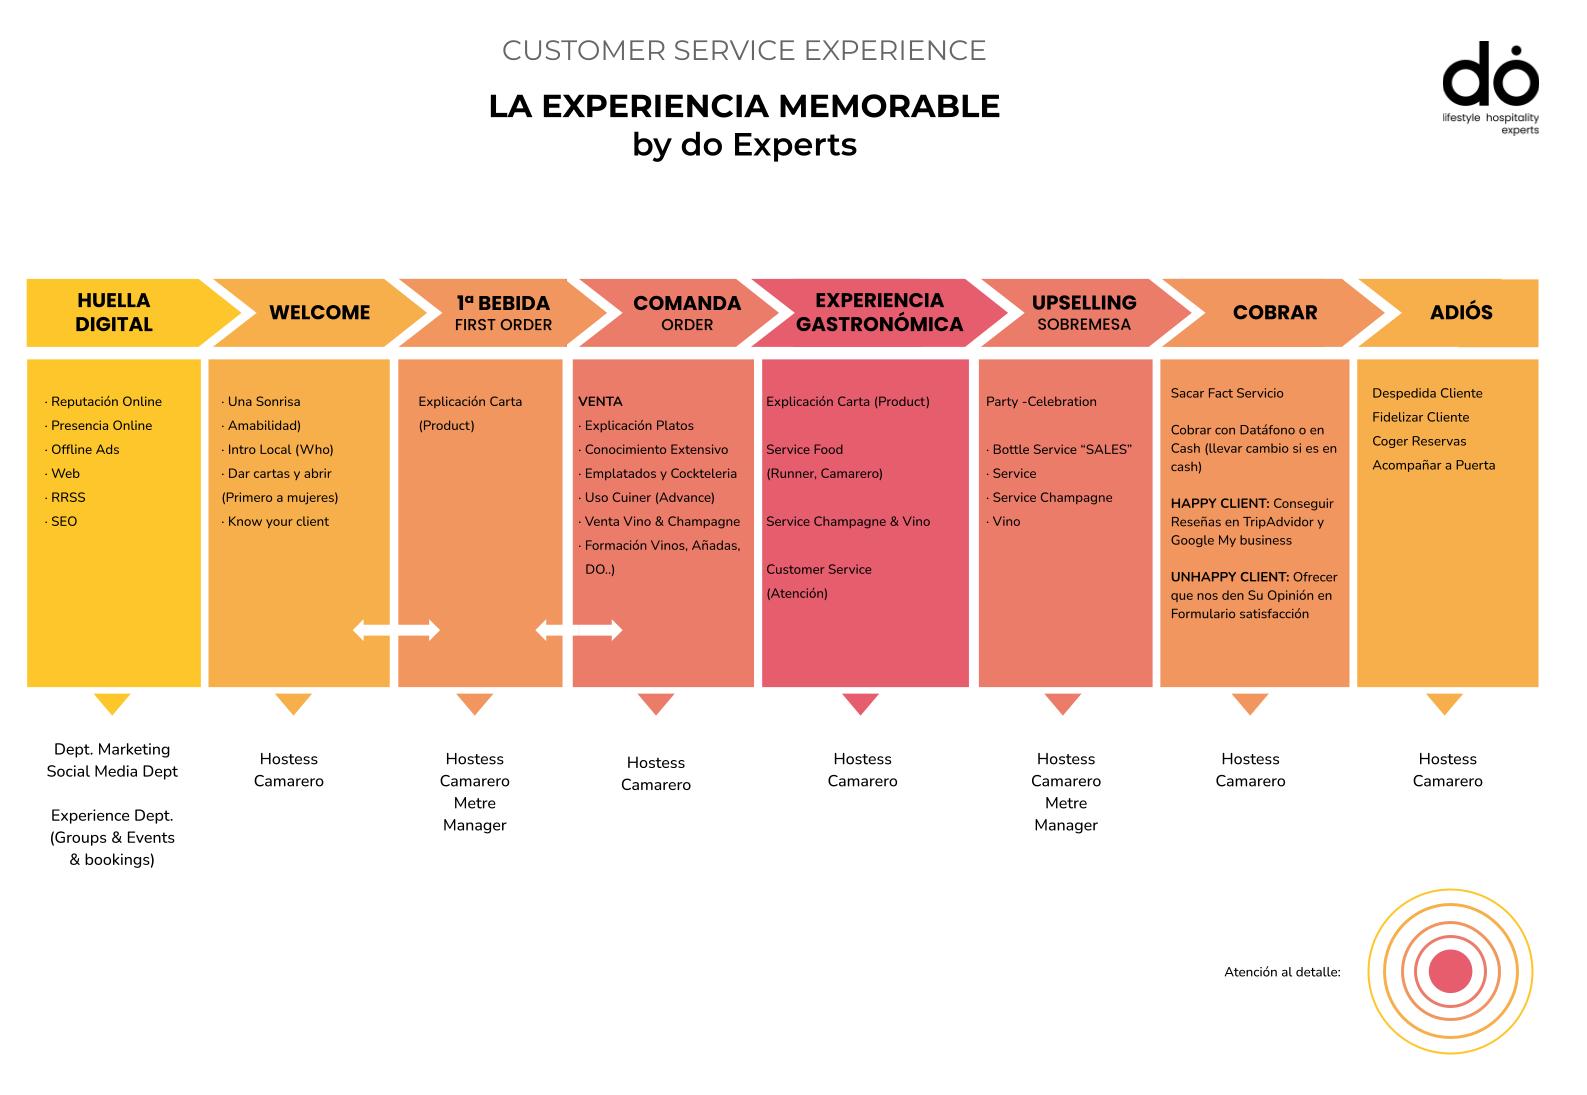 Experiencia memorable by do Experts